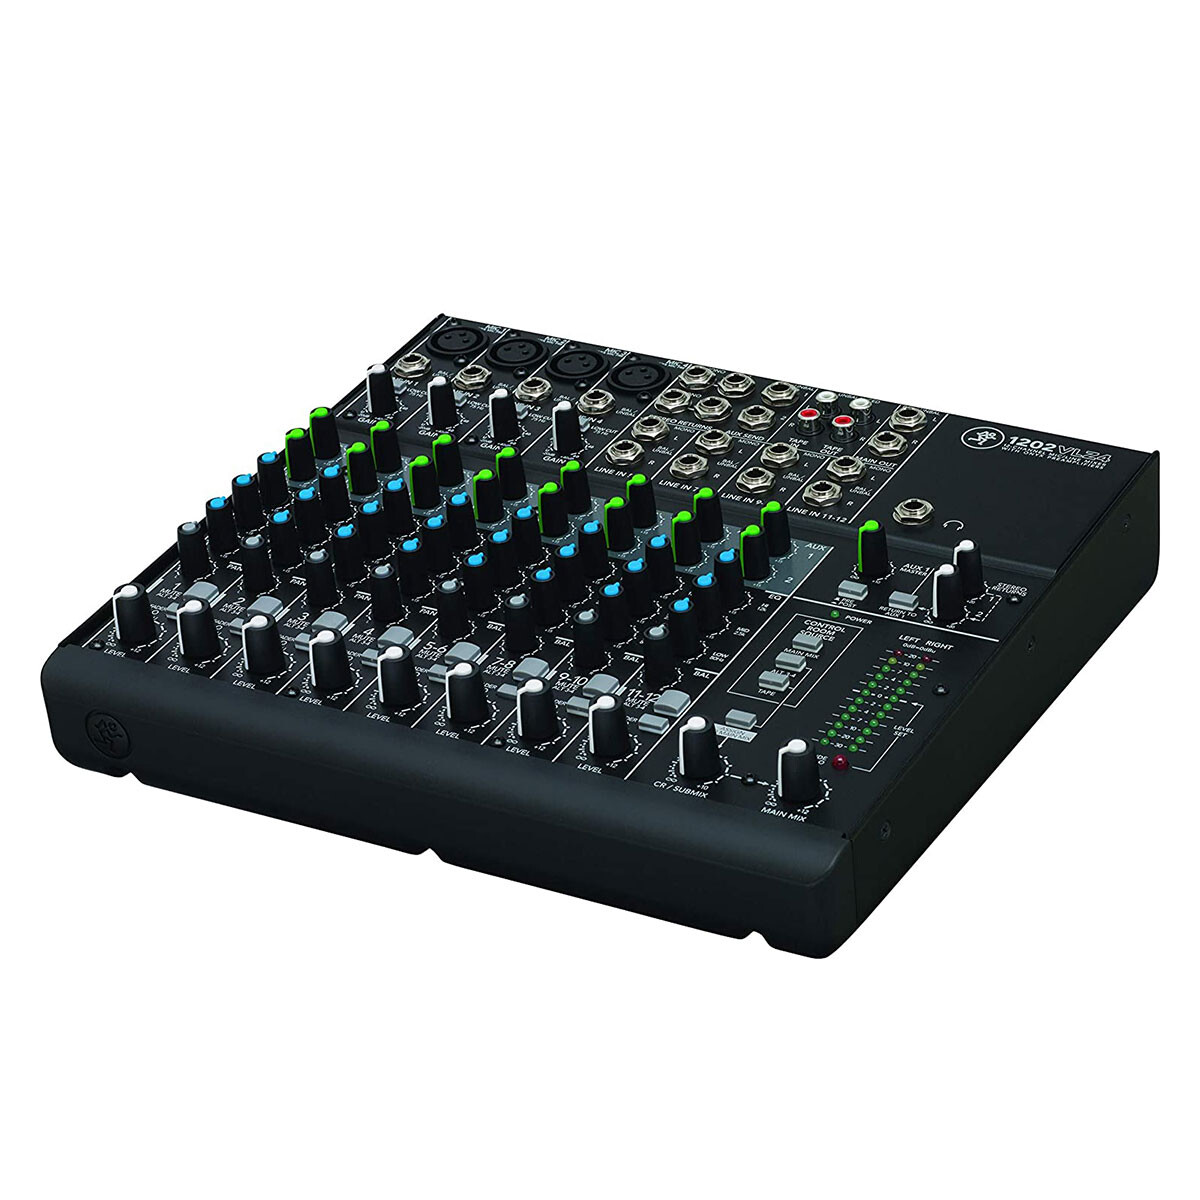 Consola Mackie 1202vlz4 12 Canales 